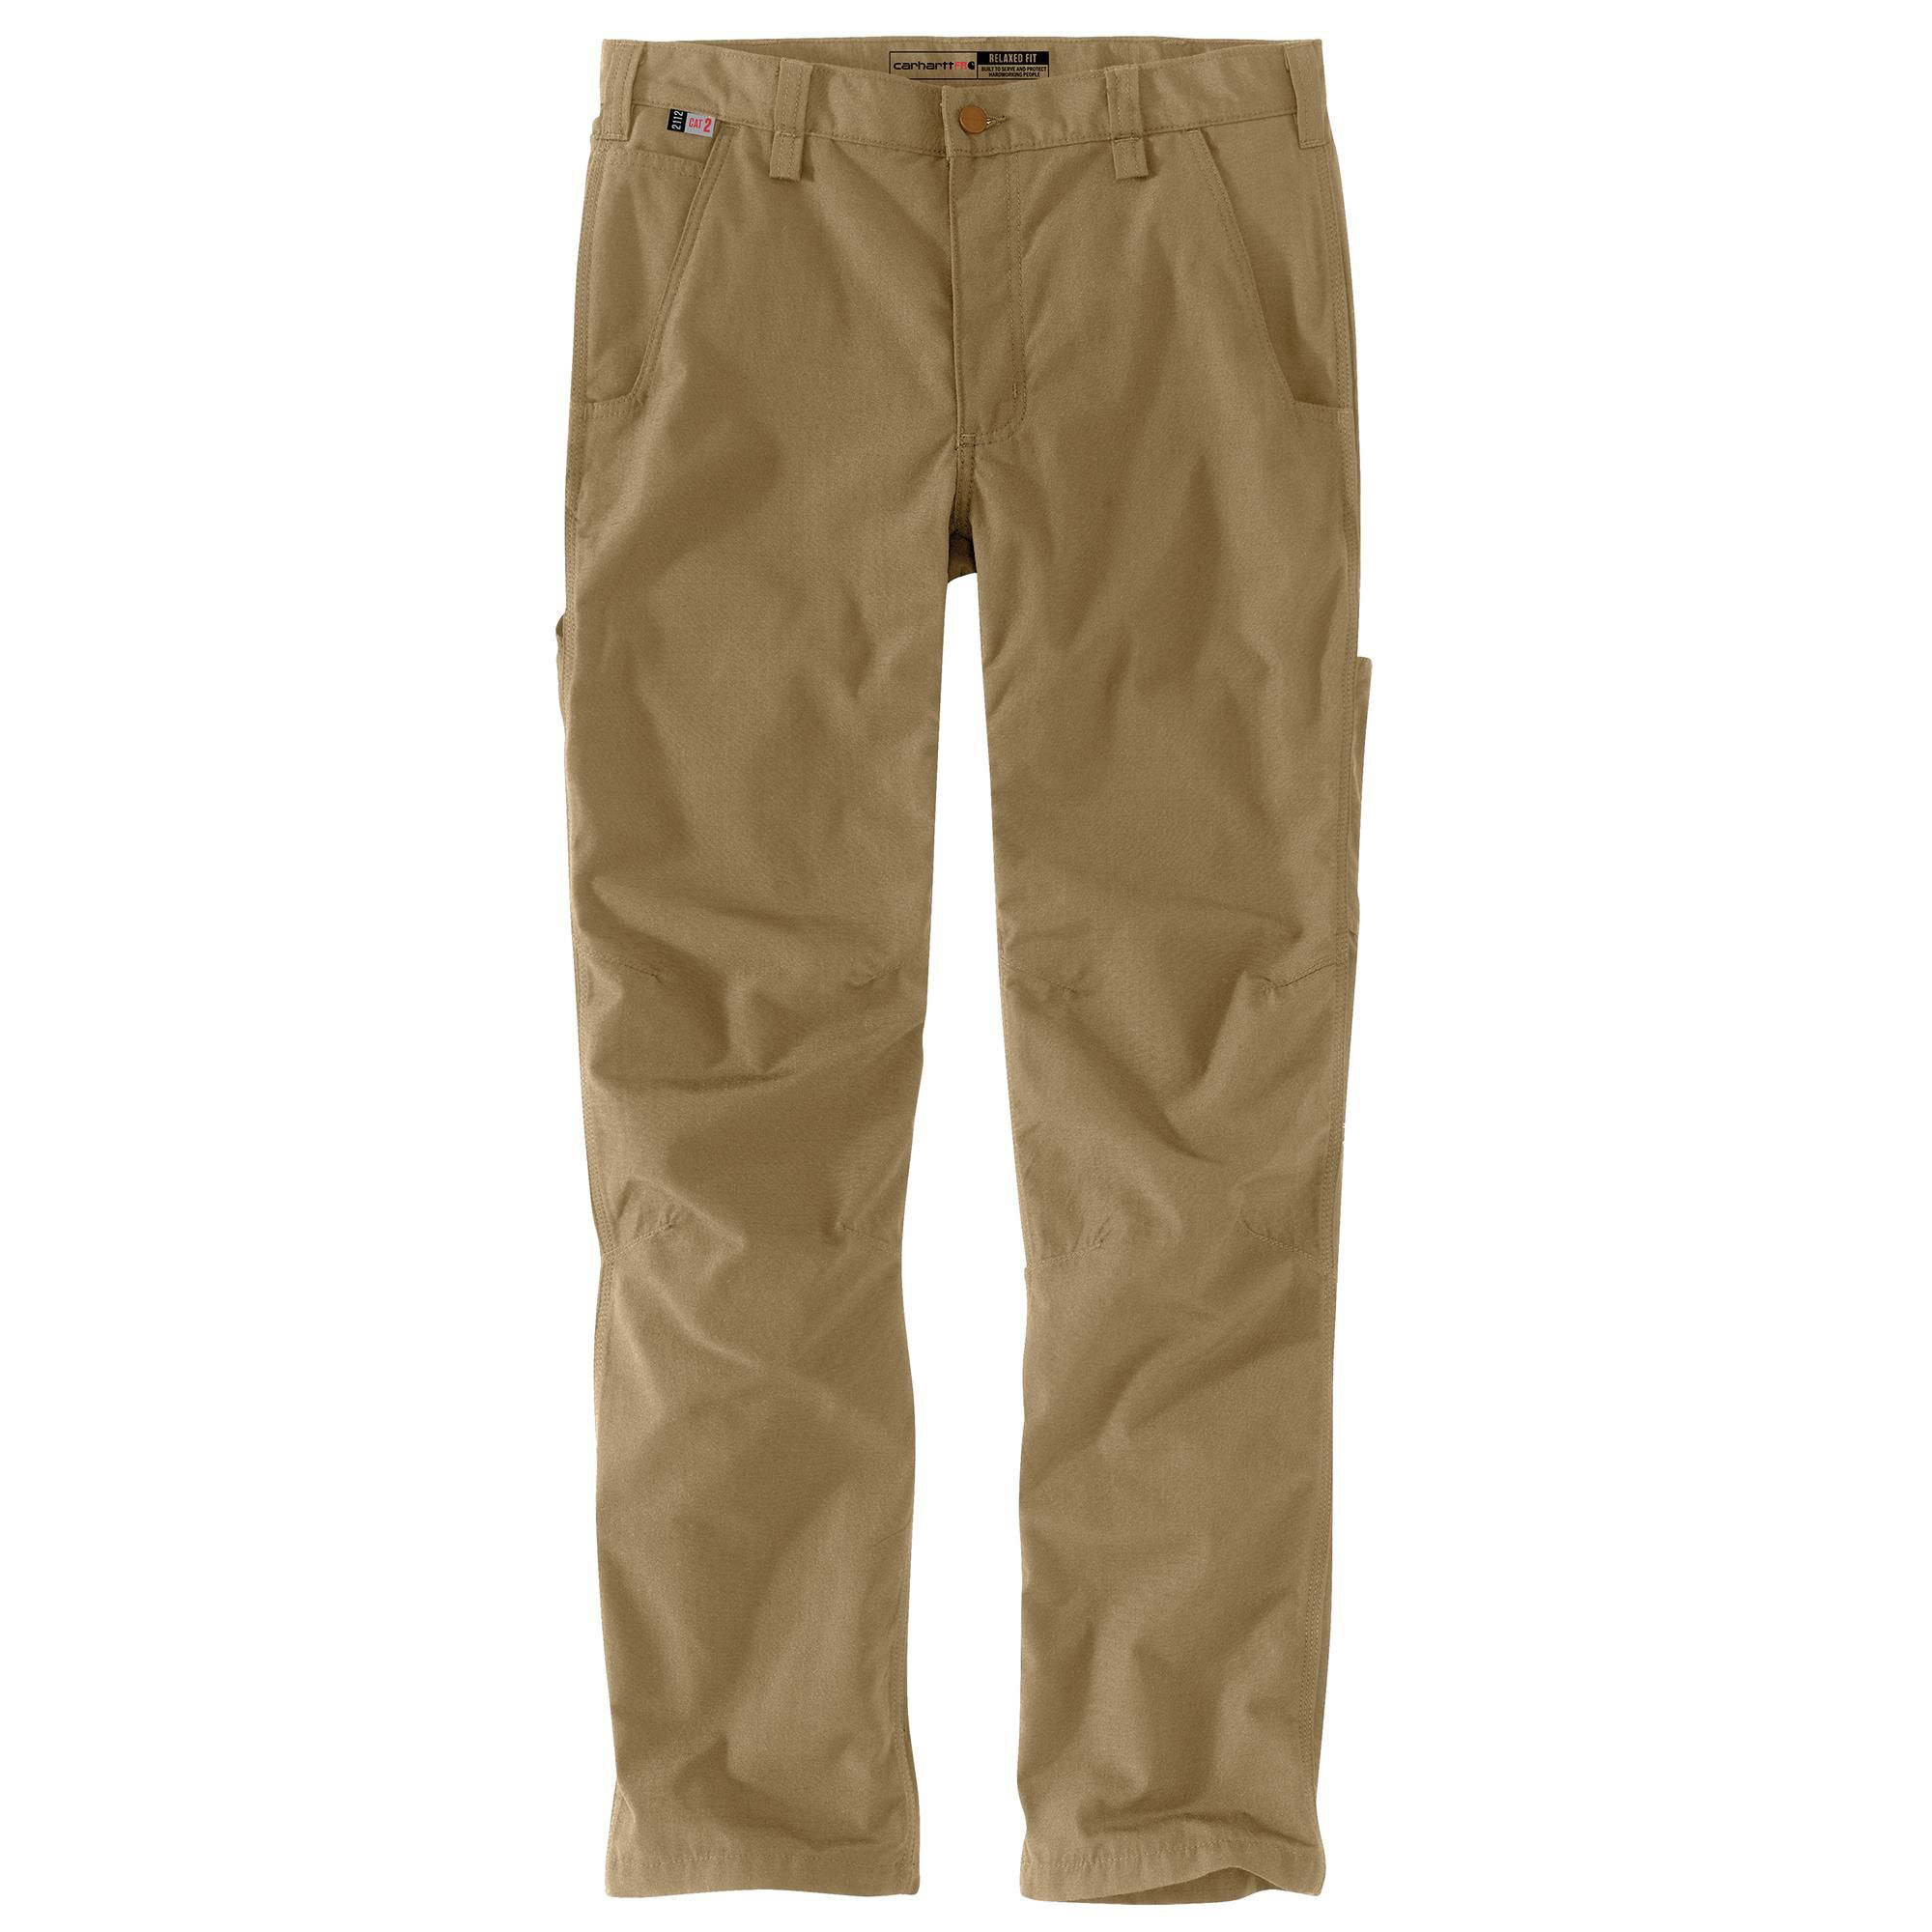 Carhartt Flame-Resistant Force Relaxed-Fit Ripstop Utility Work Pants for Men - Klondike Khaki - 38x32